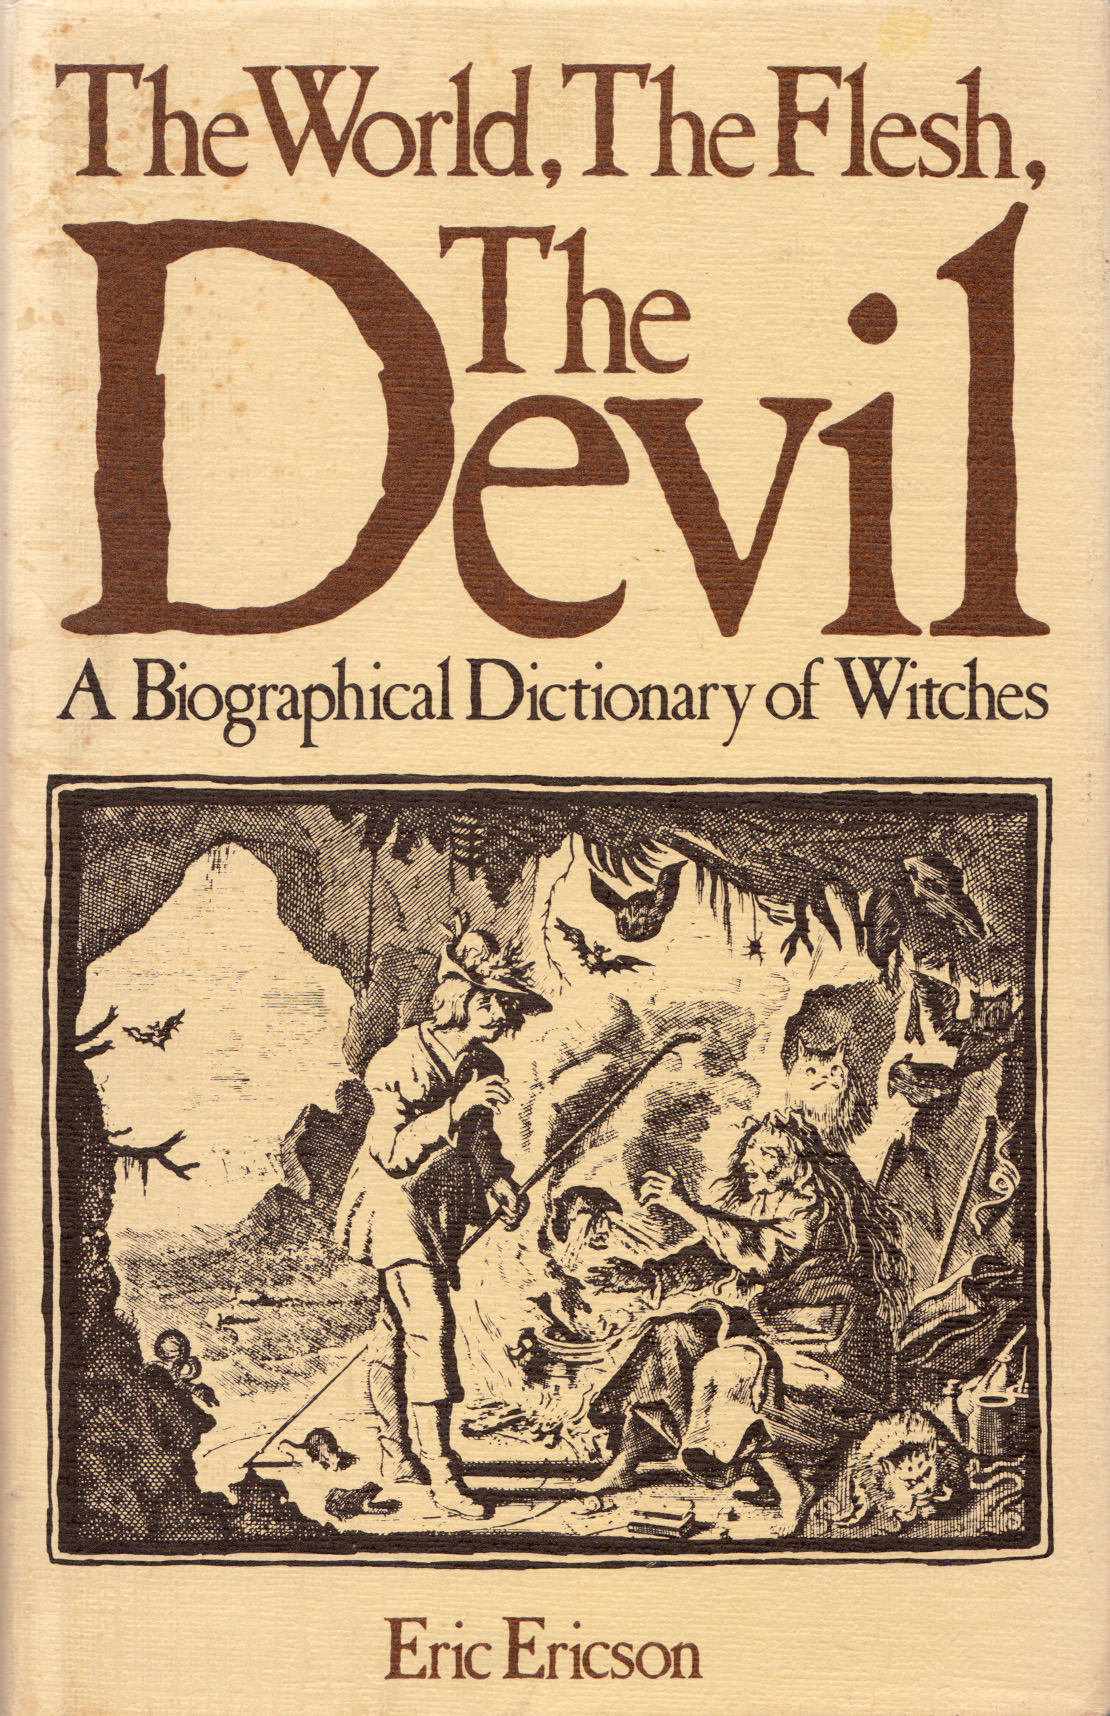 The World, The Flesh, The Devil: A Biographical Dictionary of Witches, by Eric Ericson